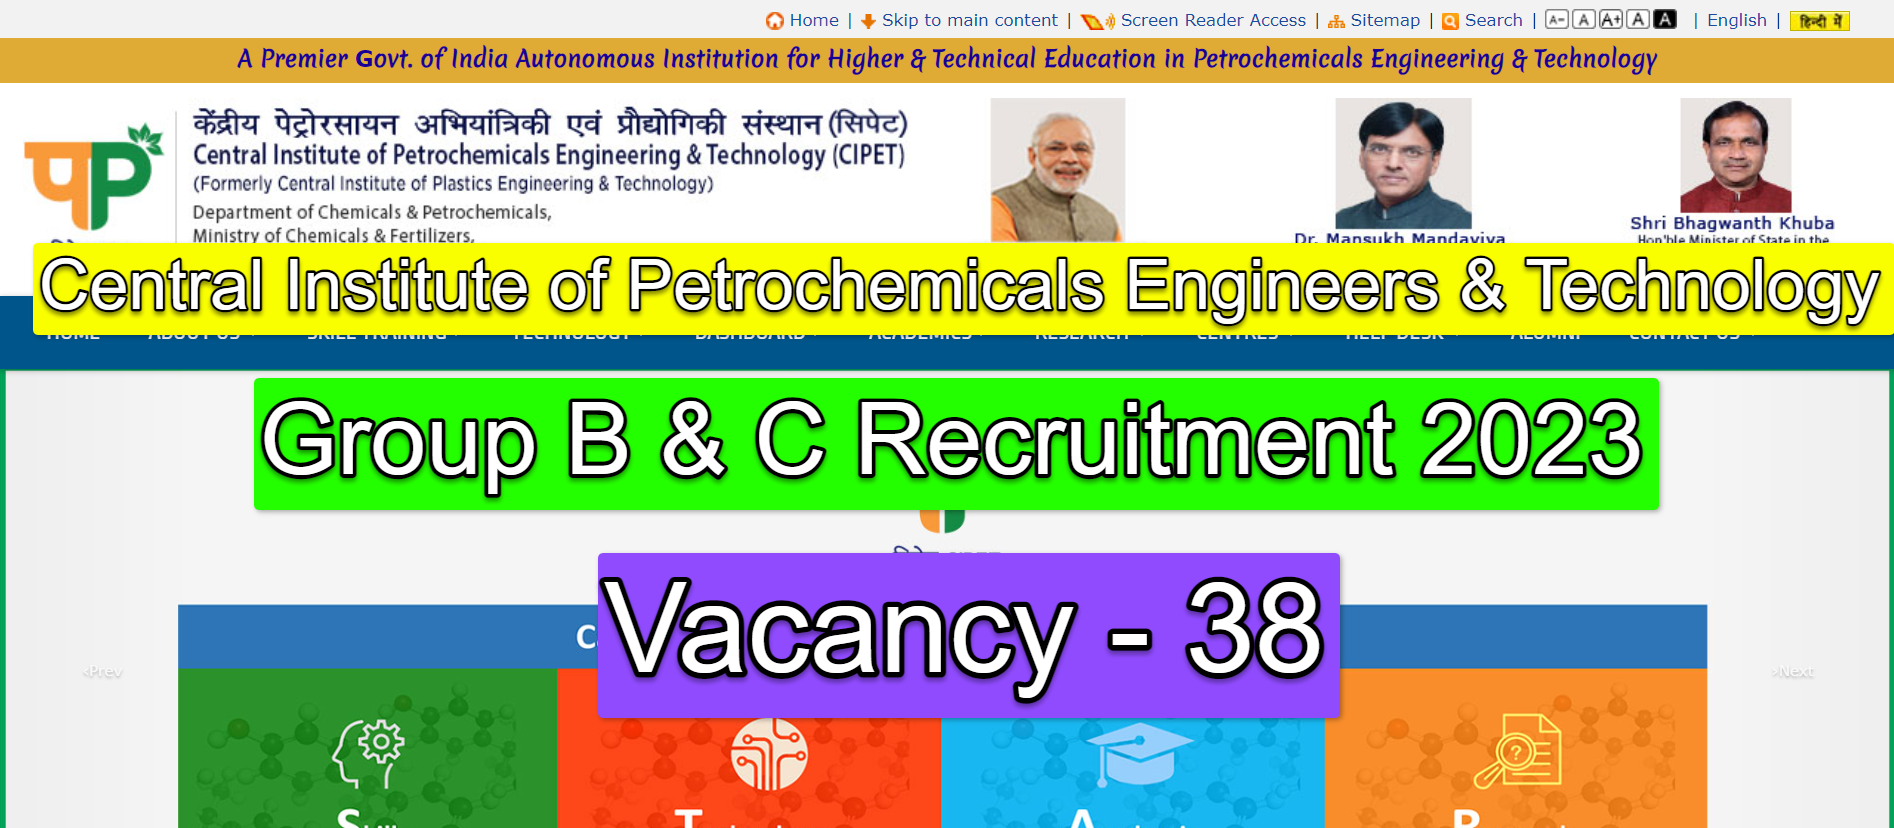 CIPET Recruitment 2023 : Apply For Group B and C Posts